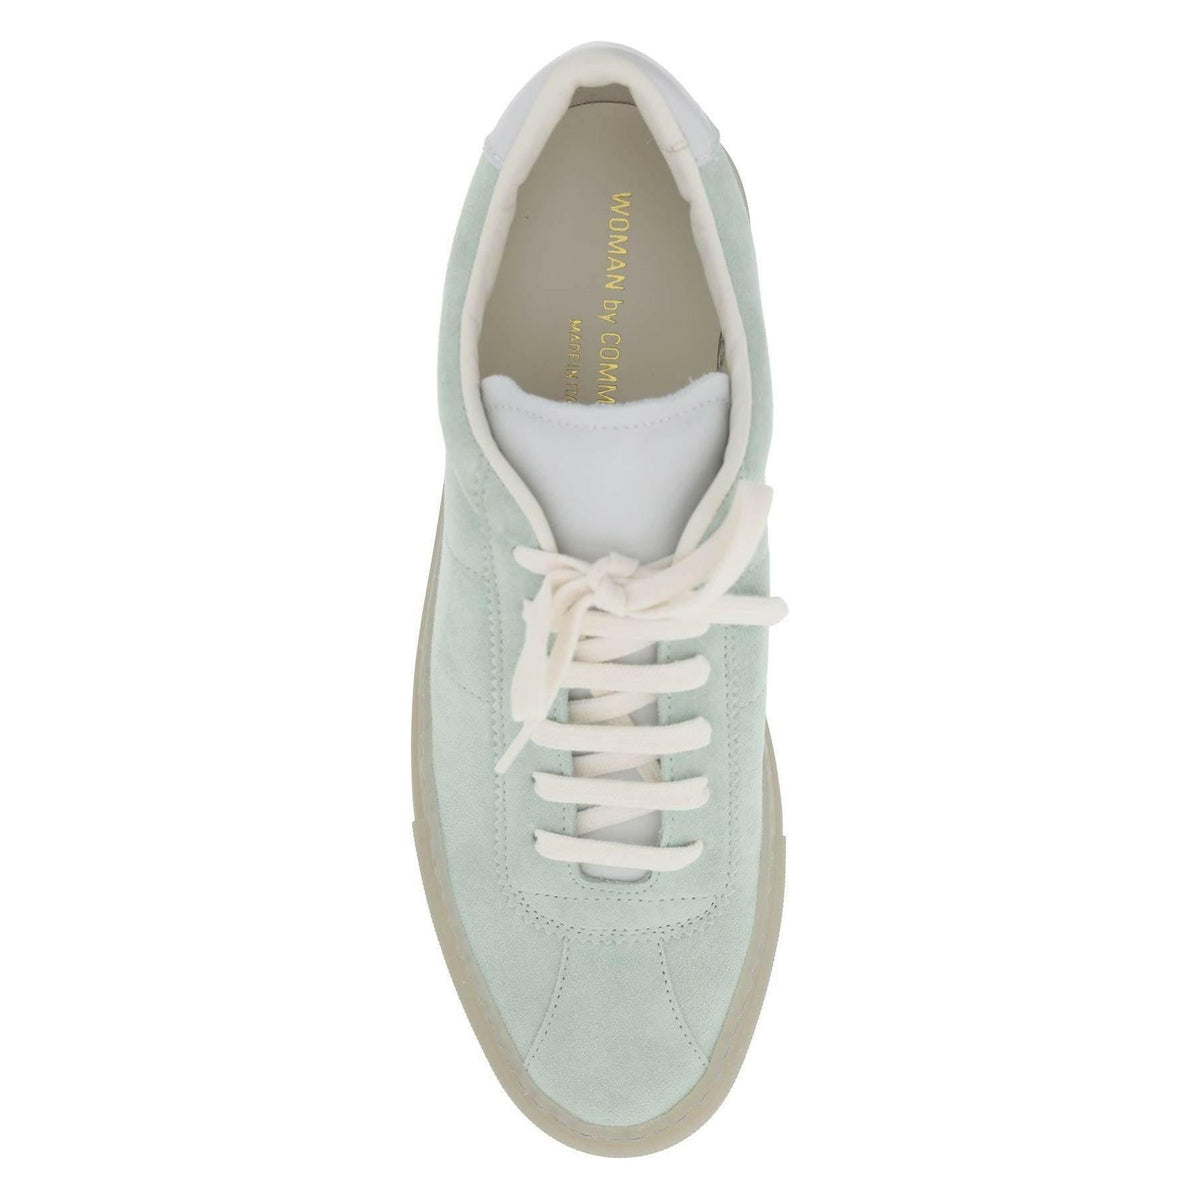 COMMON PROJECTS - Mint Green Suede Leather Sneakers - JOHN JULIA